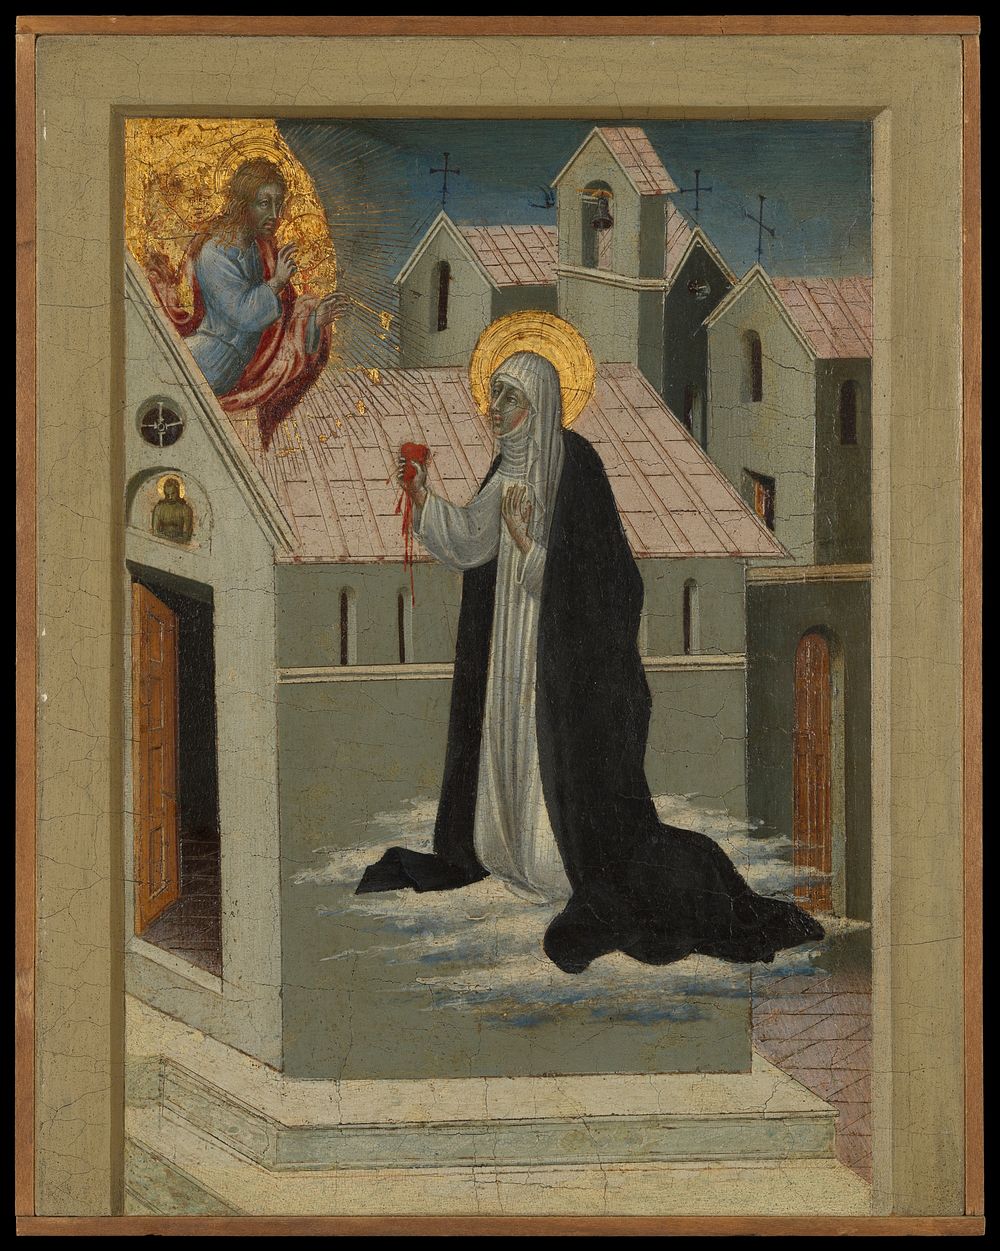 Saint Catherine of Siena Exchanging Her Heart with Christ by Giovanni di Paolo (Giovanni di Paolo di Grazia)